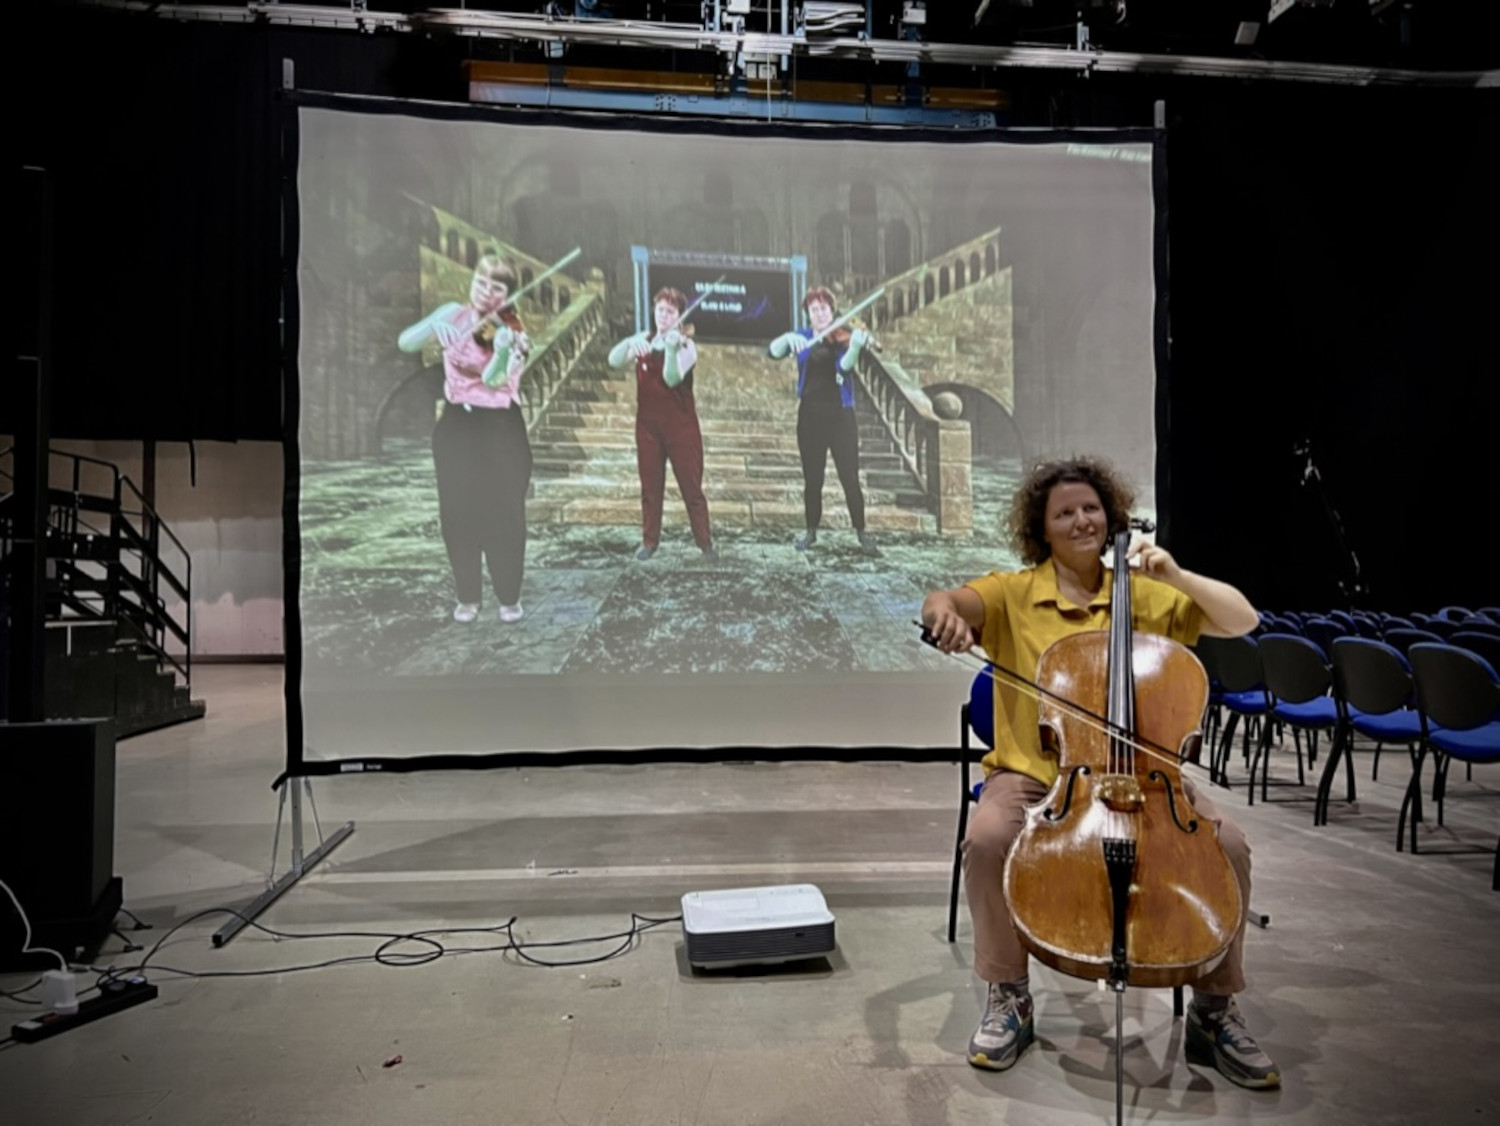 Person playing cello in front of a large screen showing three people playing violins